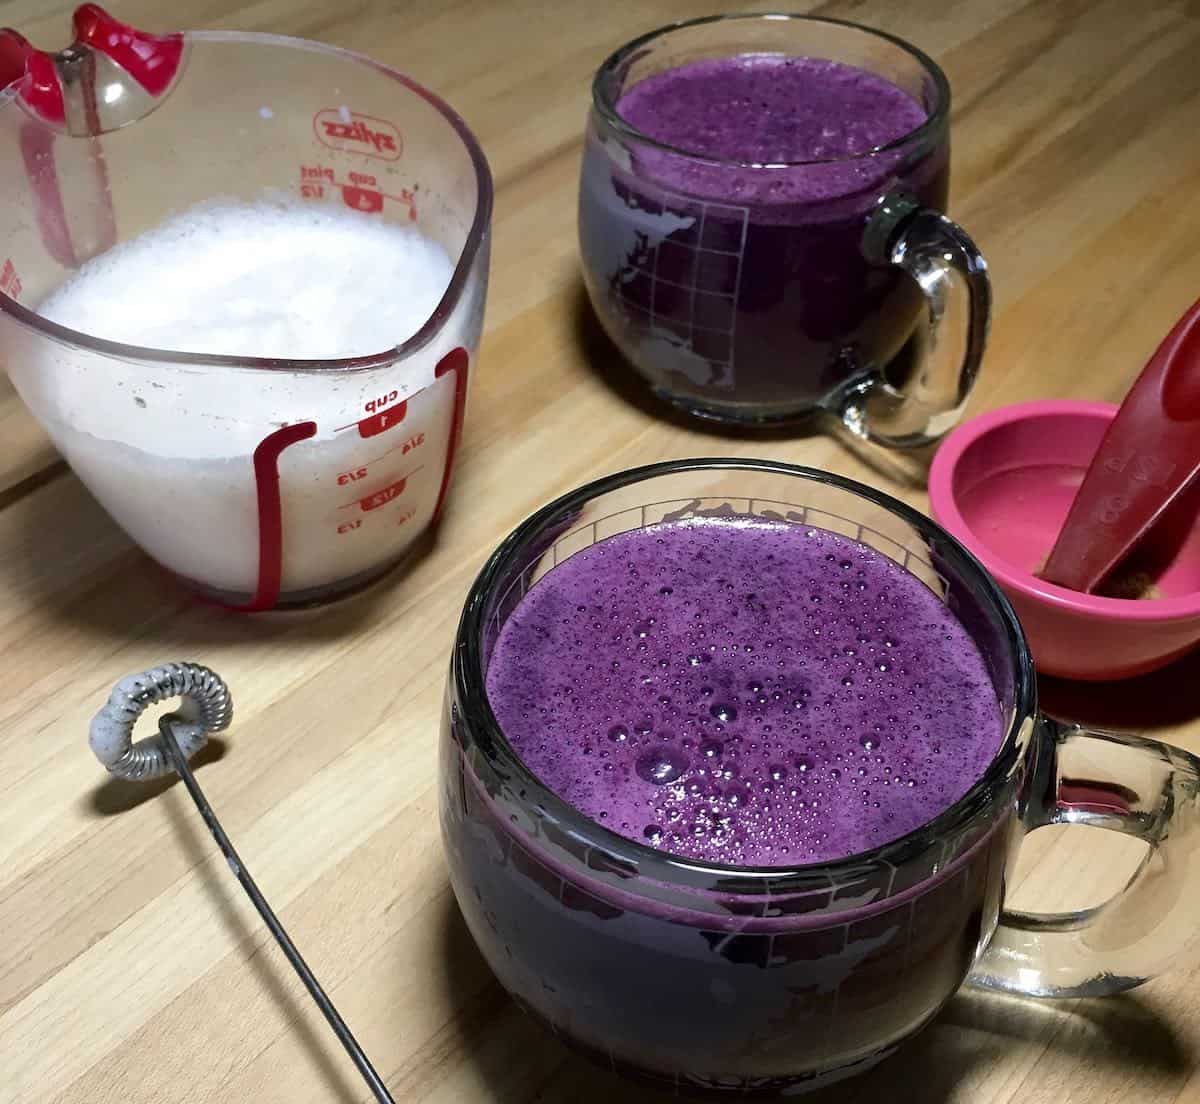 blueberry latte ingredients and milk froth